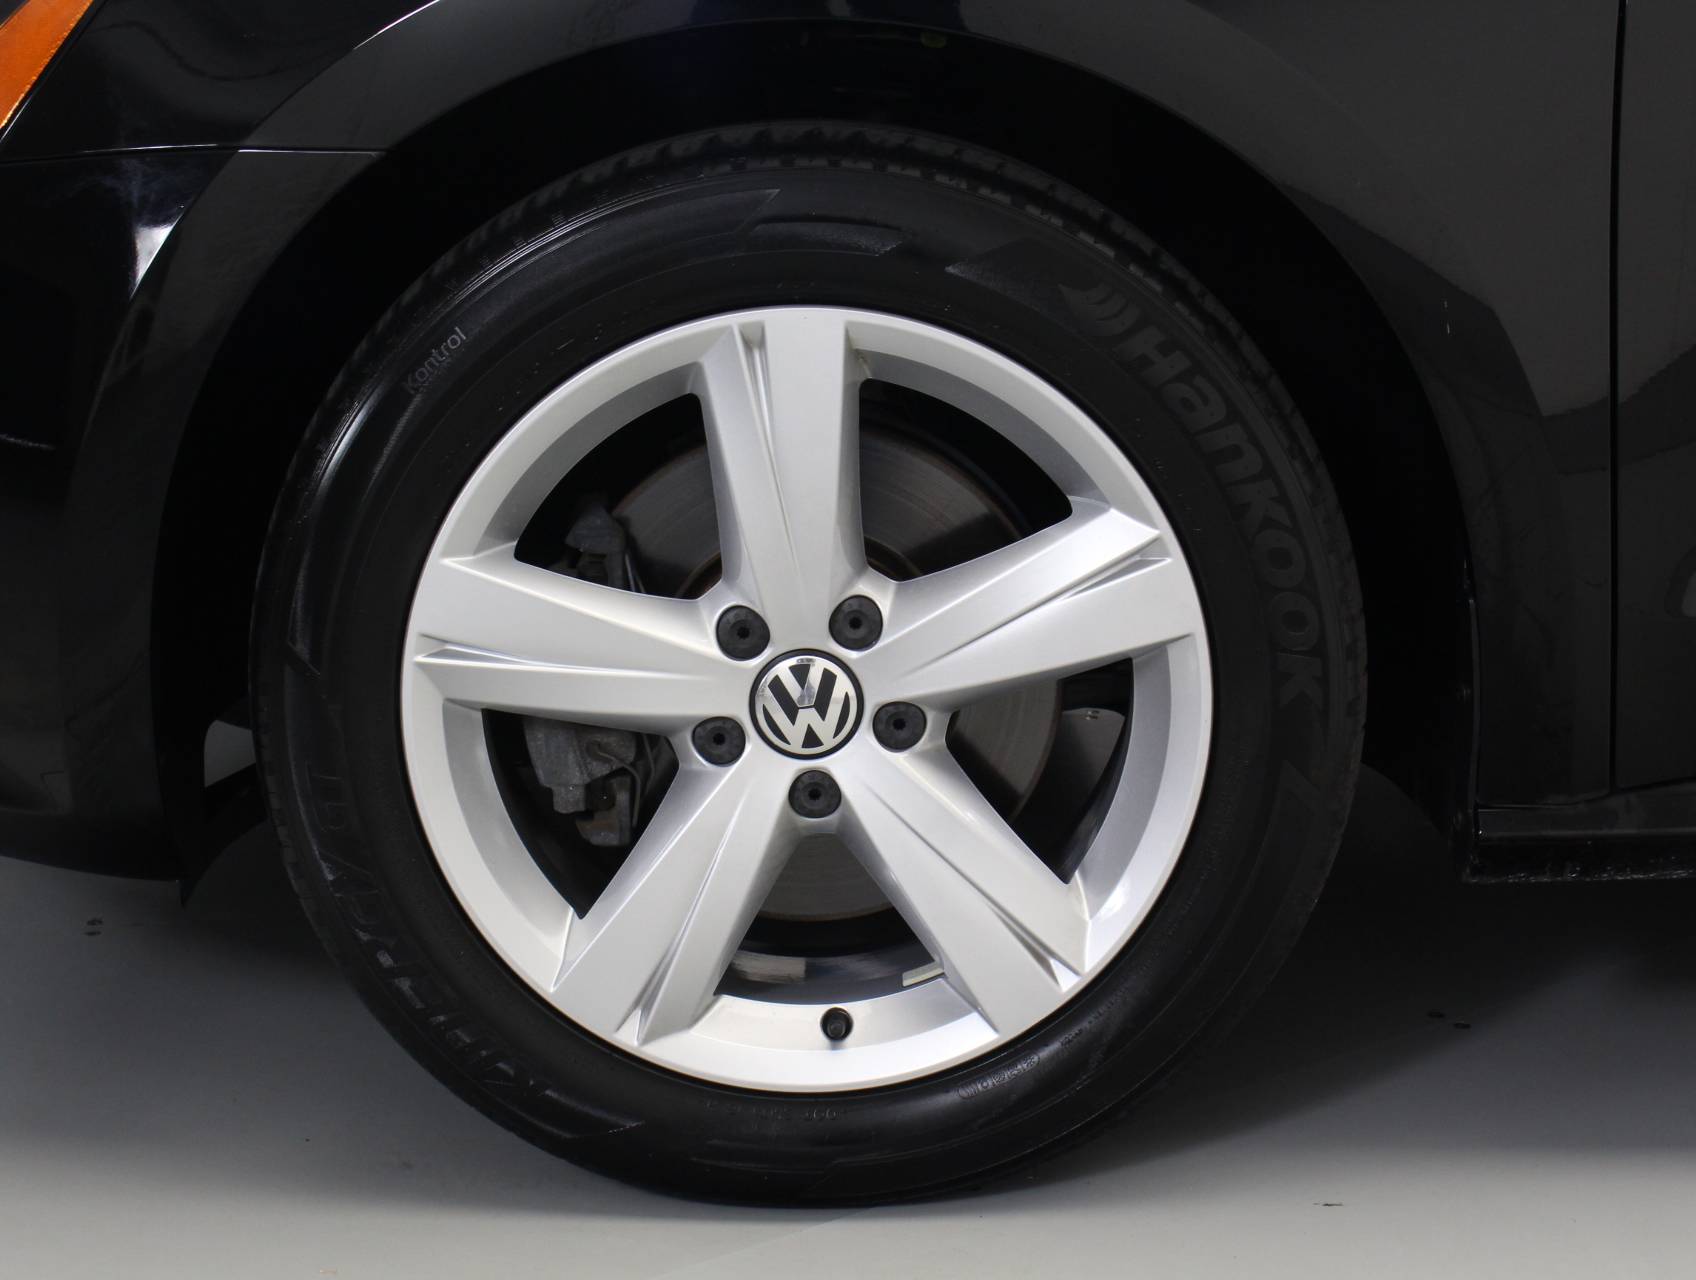 Florida Fine Cars - Used VOLKSWAGEN PASSAT 2015 WEST PALM Limited